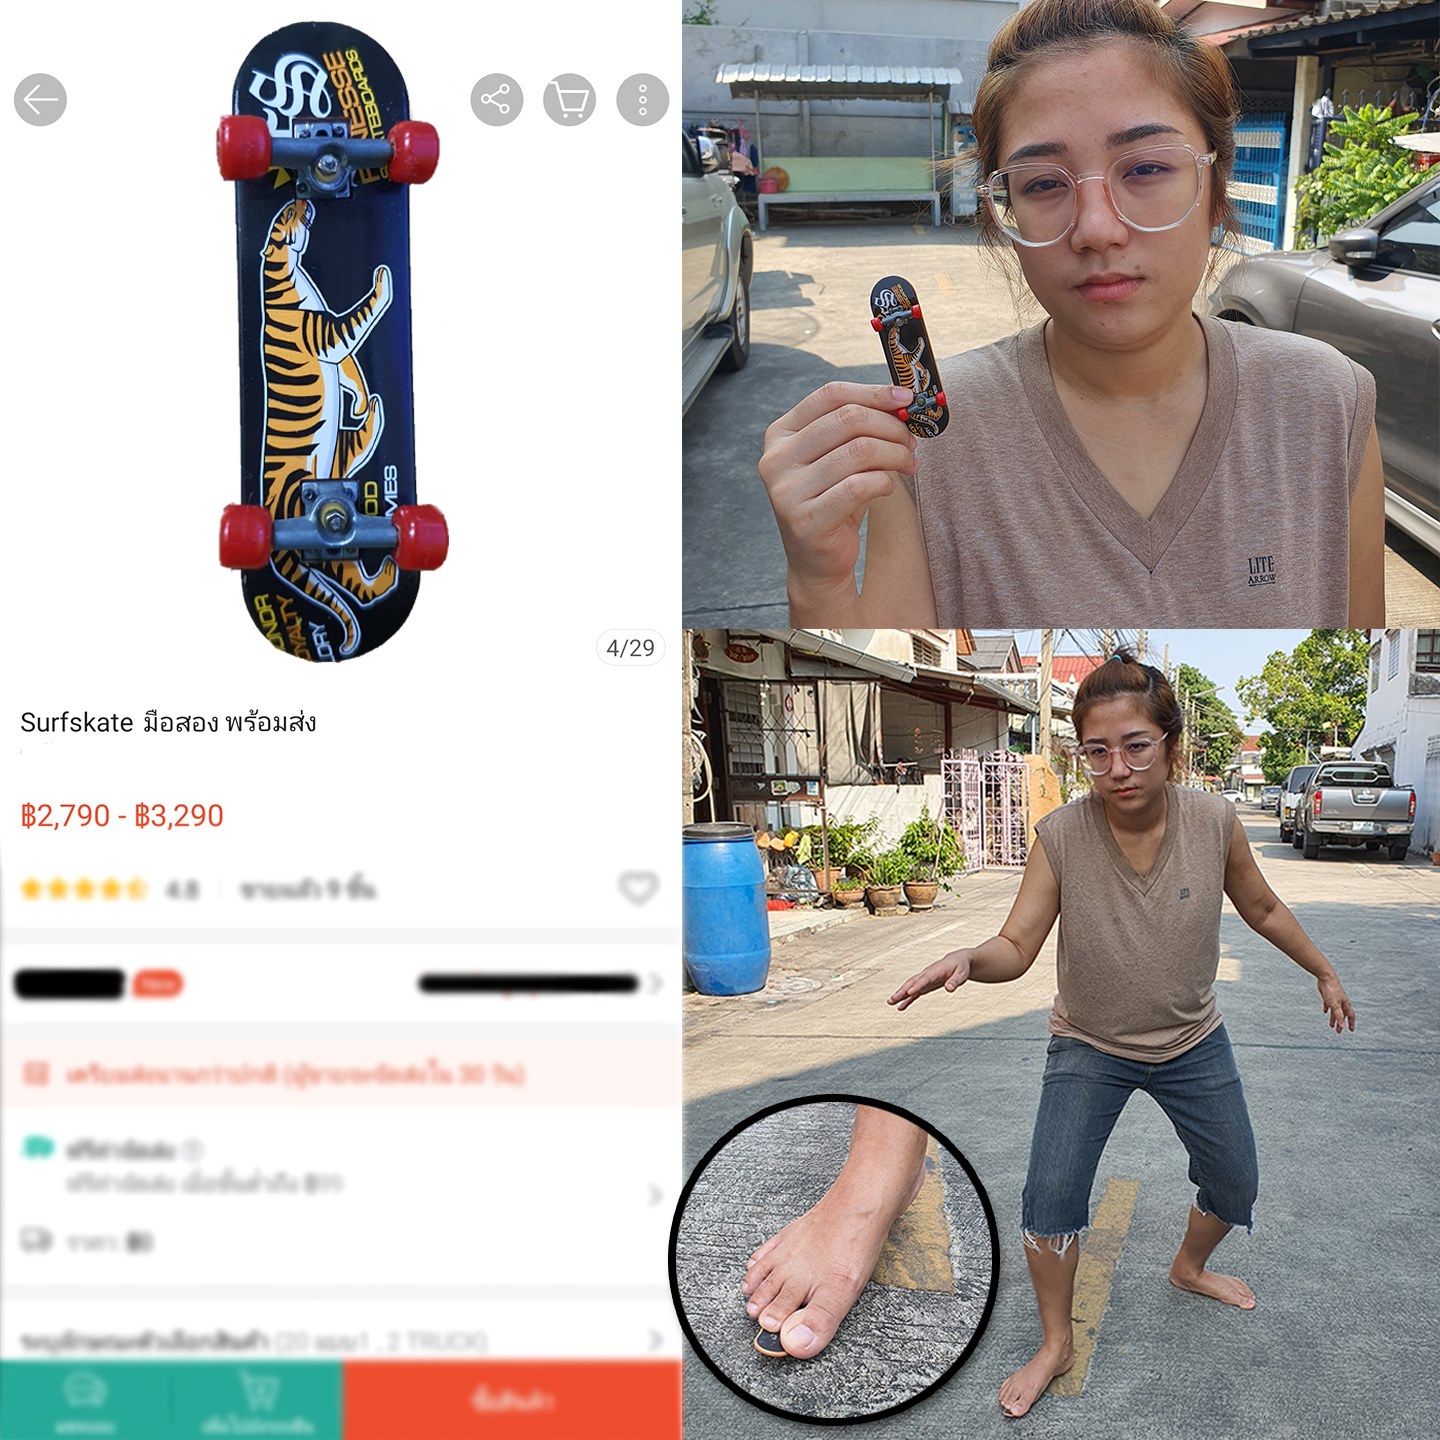 Surfskate item shopping page and disappointed woman